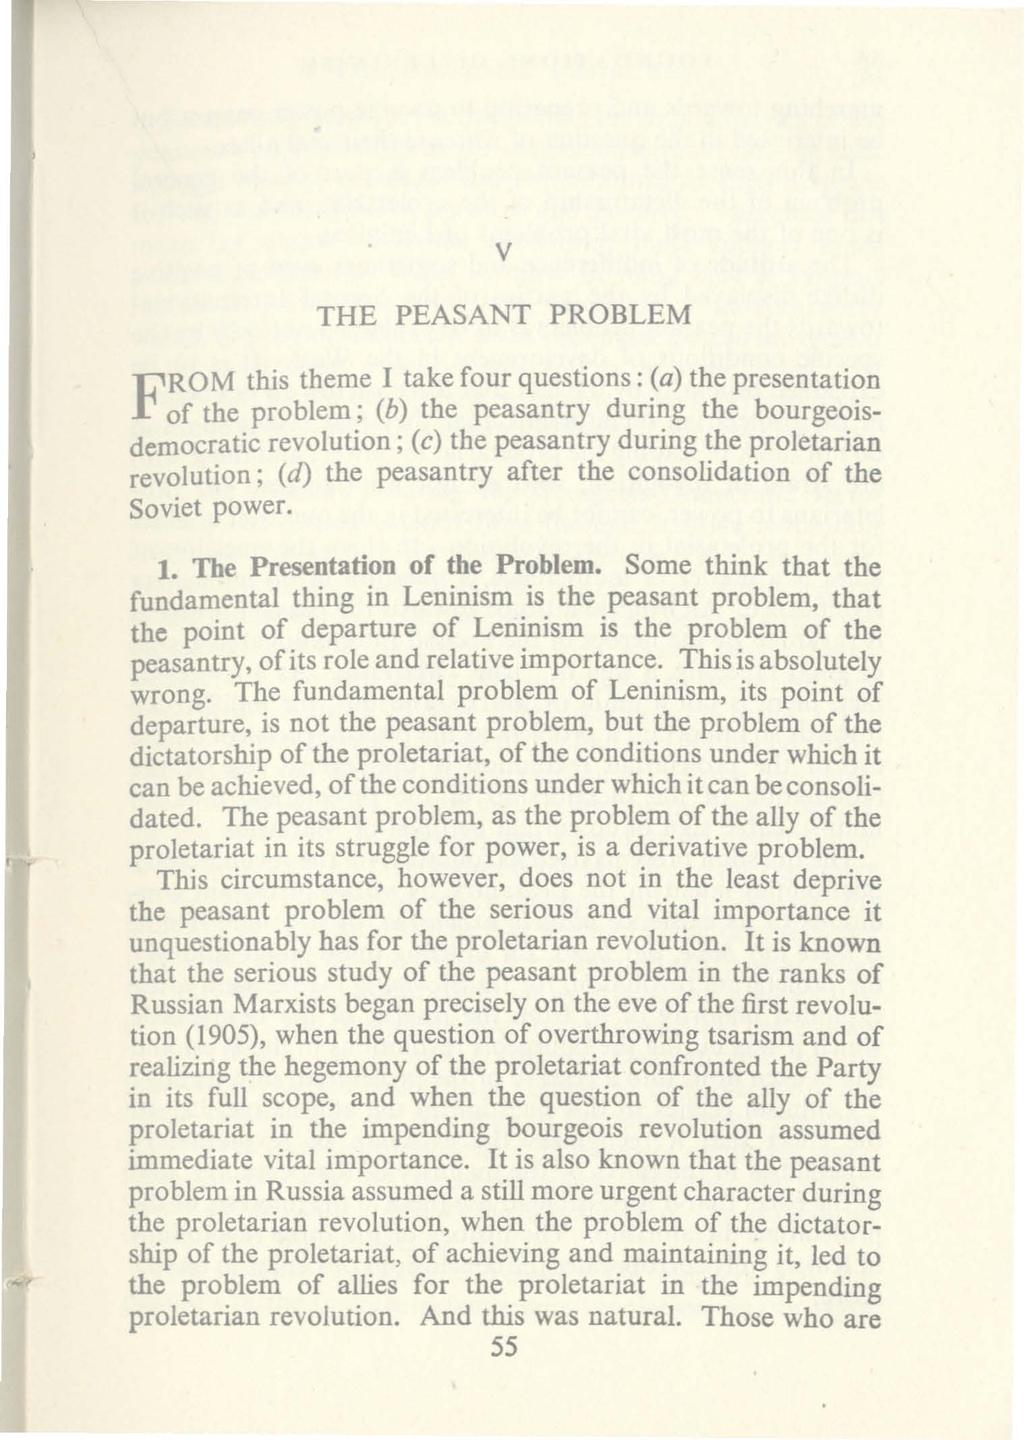 v THE PEASANT PROBLEM ROM this theme I take four questions: (a) the presentation Fof the problem; (b) the peasantry during the bourgeoisdemocratic revolution; (c) the peasantry during the proletarian